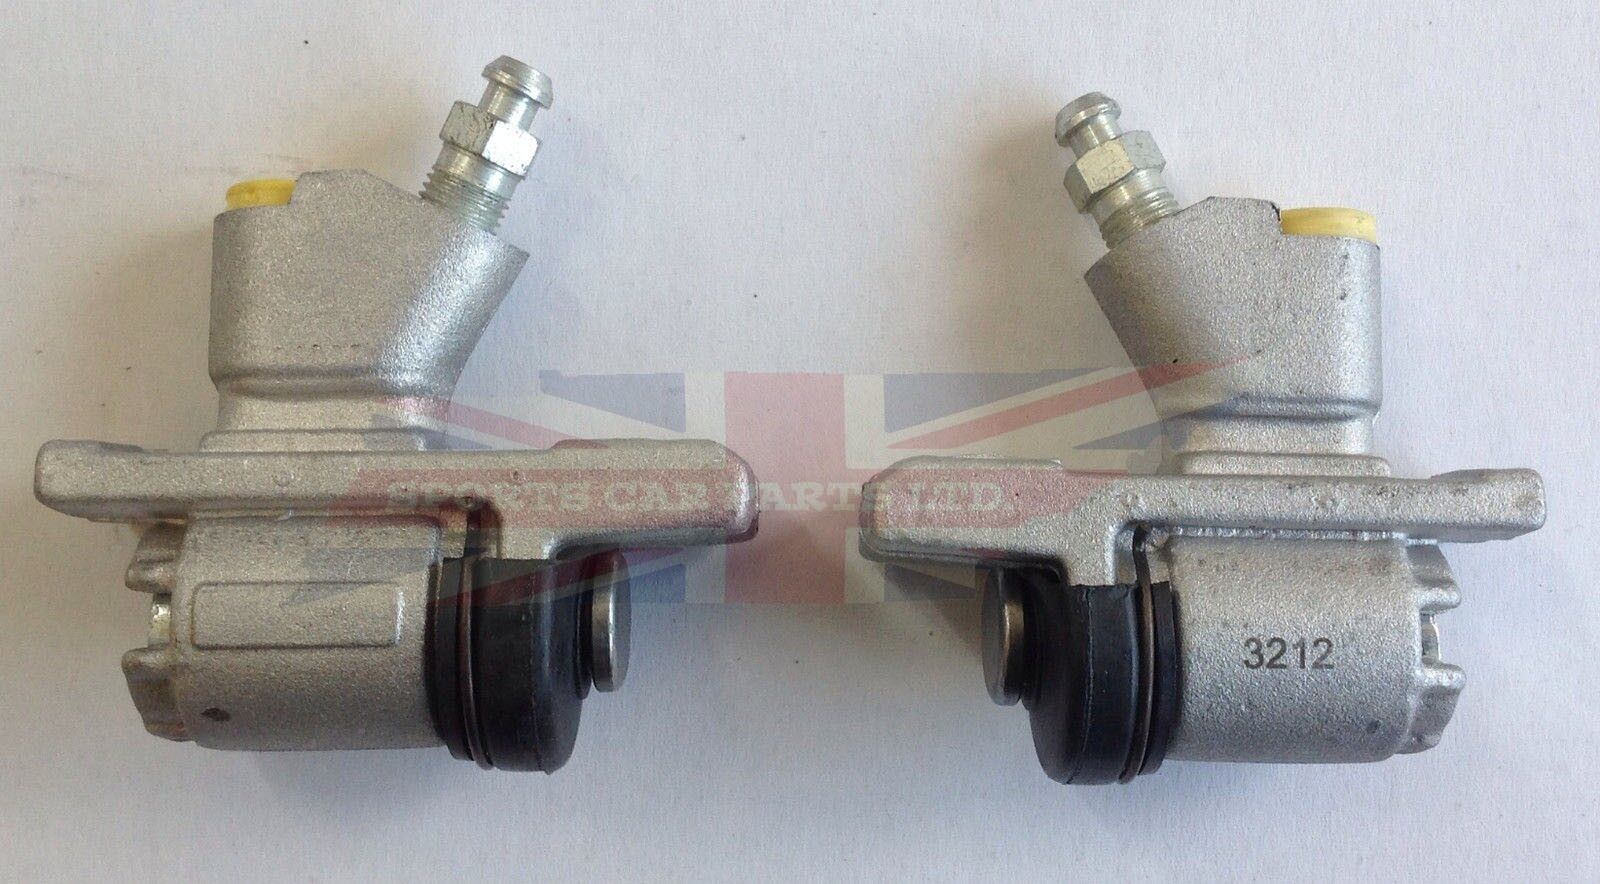 Pair of New Rear Wheel Cylinders for Triumph Spitfire 1962-1970 GT6 to KC7278